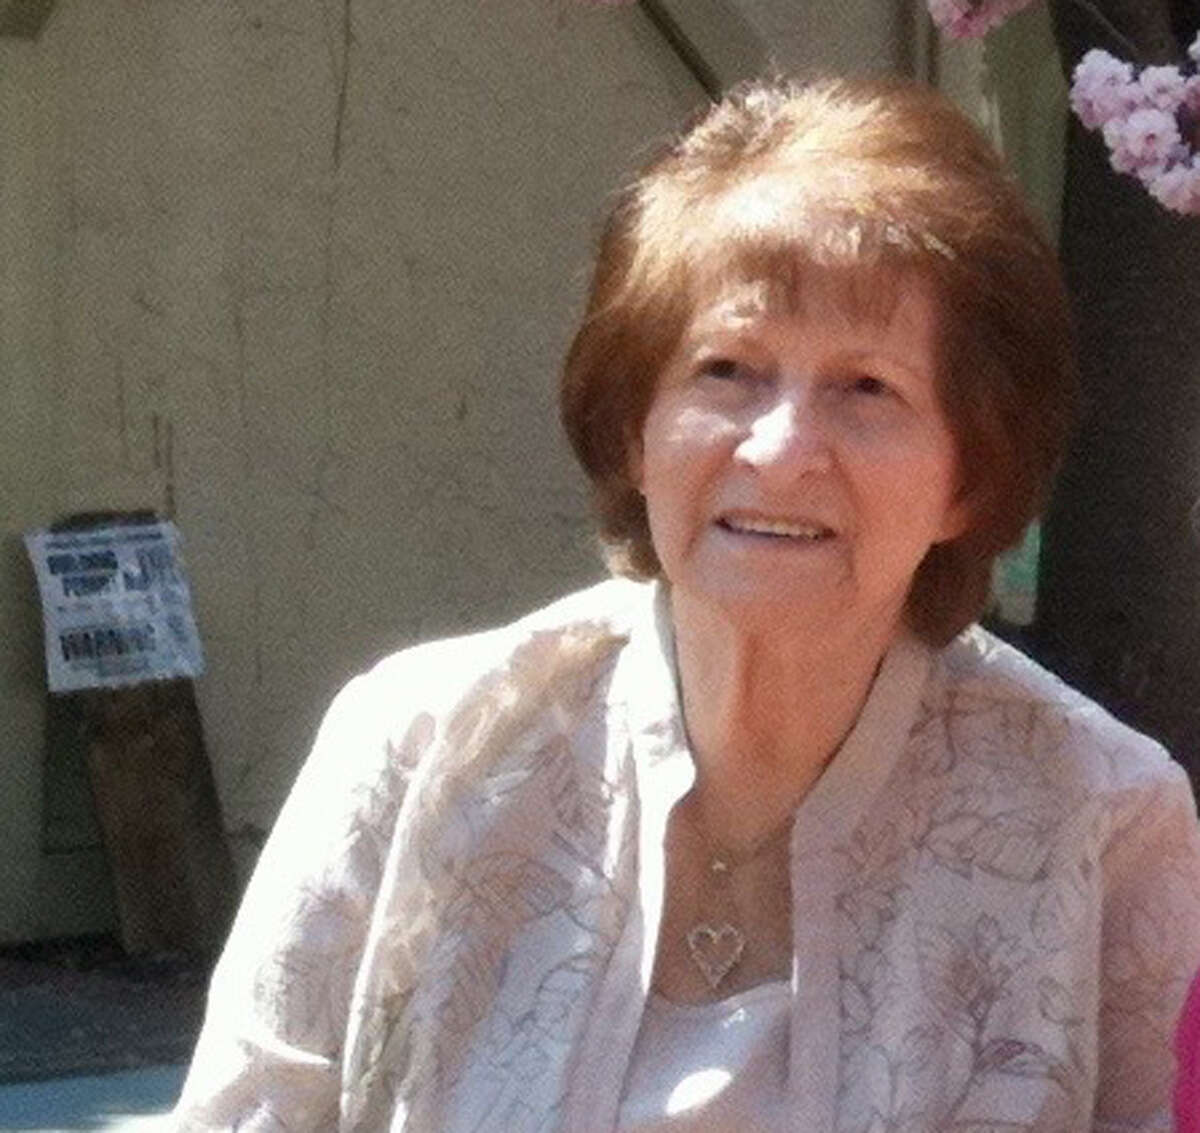 This May 8, 2011 photo provided by Bob Dennis shows a family photo of Marie Barbuto. By the time Roseann Keiles realized a scam artist had his hooks in her mother, Barbuto, the damage was done. The 82-year-old Long Island woman, who had Alzheimer's disease, had mailed away thousands of dollars in little envelopes to a man calling himself ?“Mr. Cashman?” who phoned every day asking for money. A bill now under consideration in New York's legislature would give banks the ability to temporarily freeze the accounts of older adults when they notice activity uncharacteristic of a person's normal spending habits. (Bob Dennis via AP) ORG XMIT: NYR103